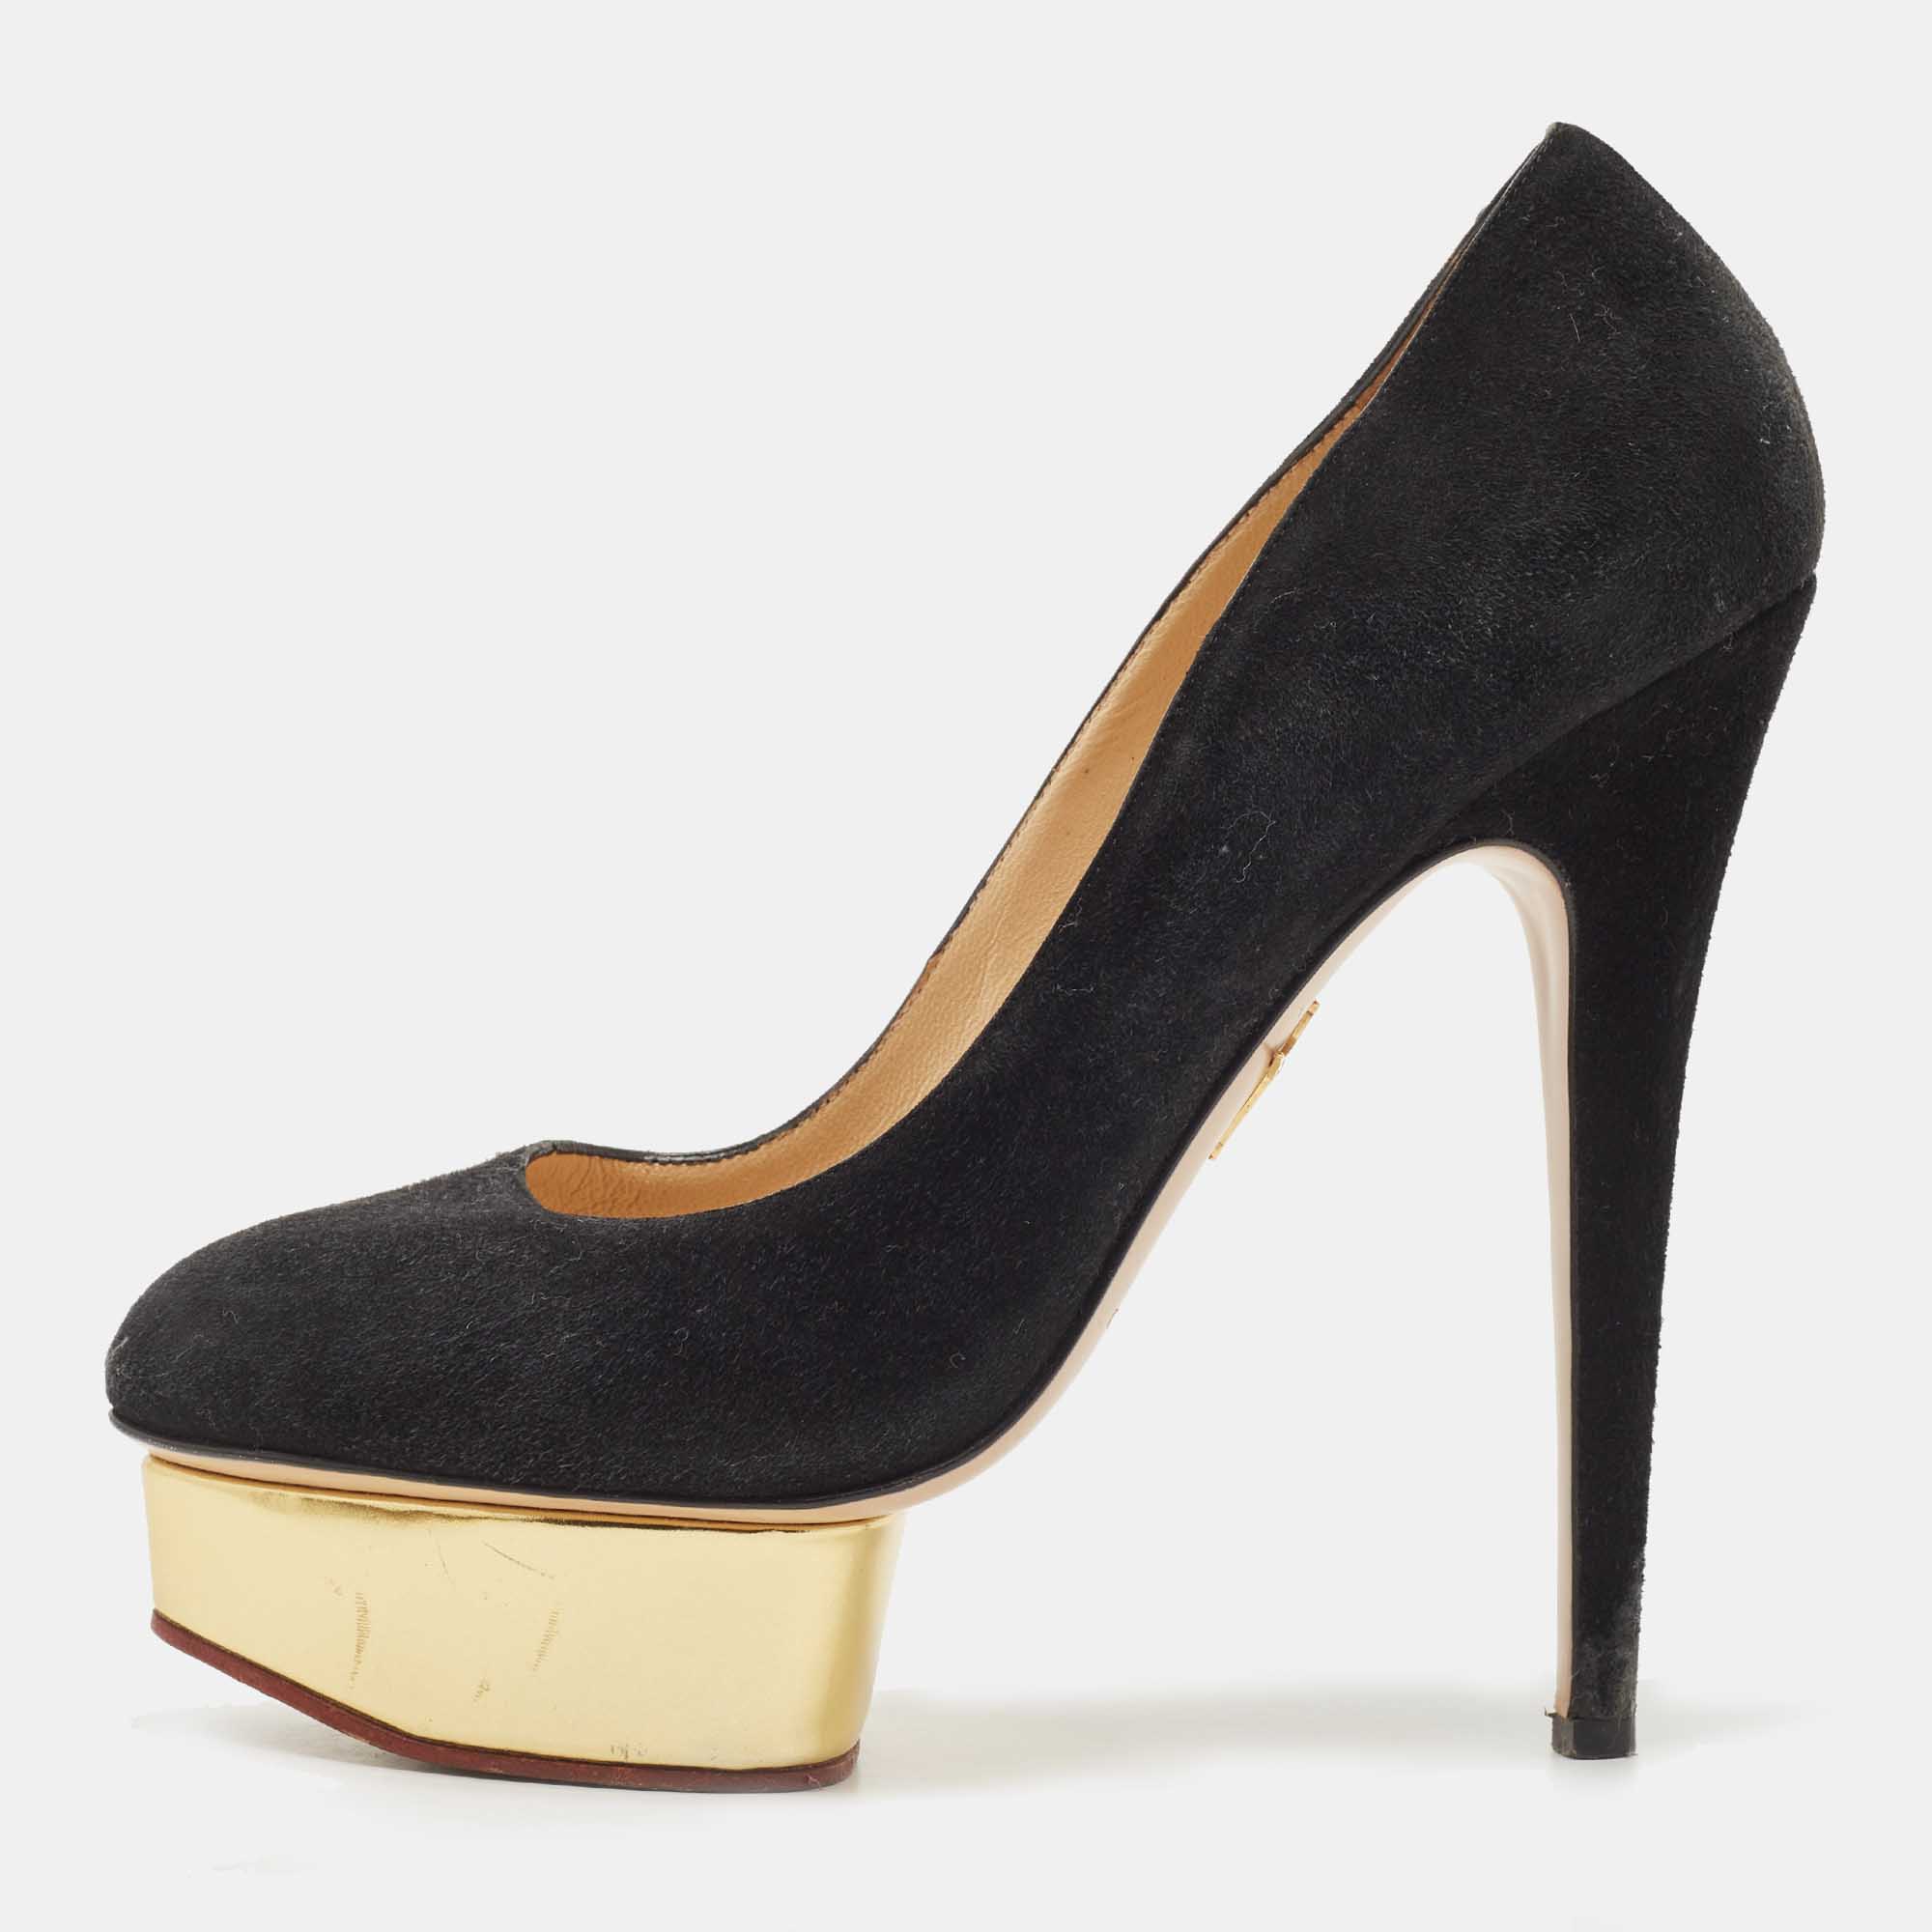 Charlotte Olympia Black Suede Dolly Pumps Size 39